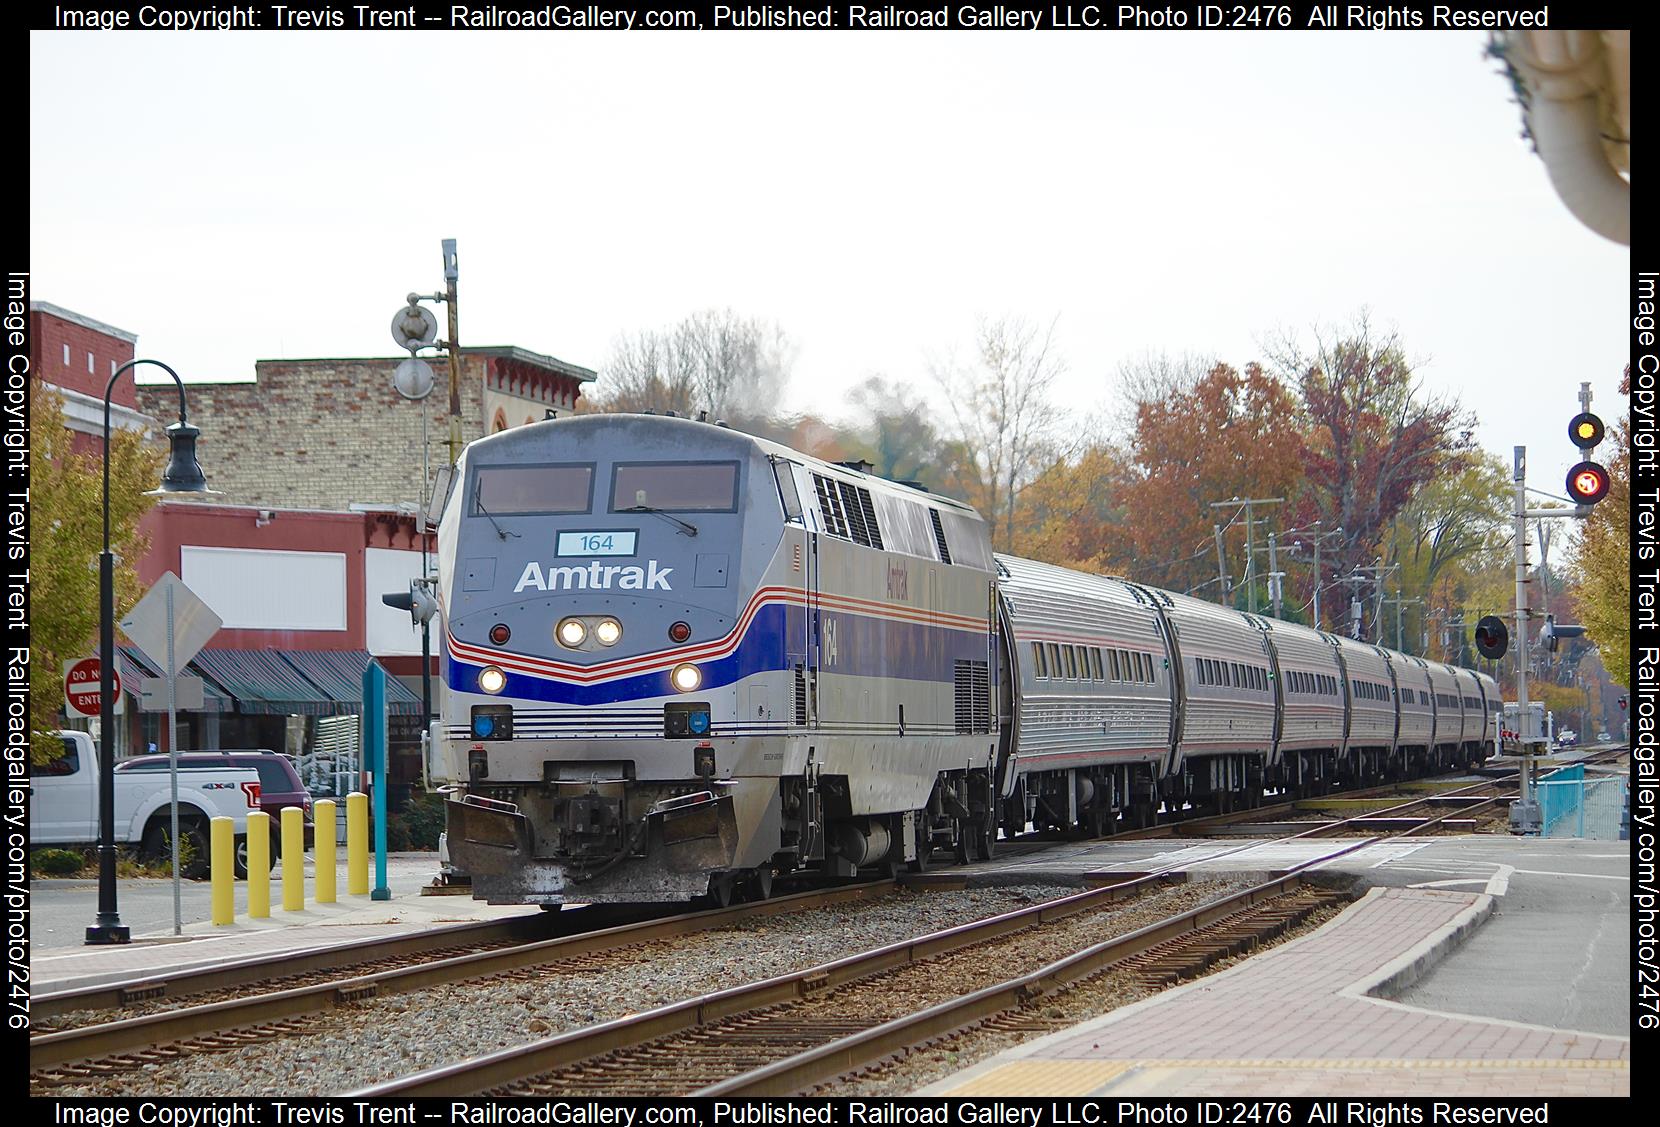 AMTK 164 is a class P42DC and  is pictured in Ashland , VA, USA.  This was taken along the CSX RF&P Sub on the Amtrak. Photo Copyright: Trevis Trent uploaded to Railroad Gallery on 11/20/2023. This photograph of AMTK 164 was taken on Wednesday, November 15, 2023. All Rights Reserved. 